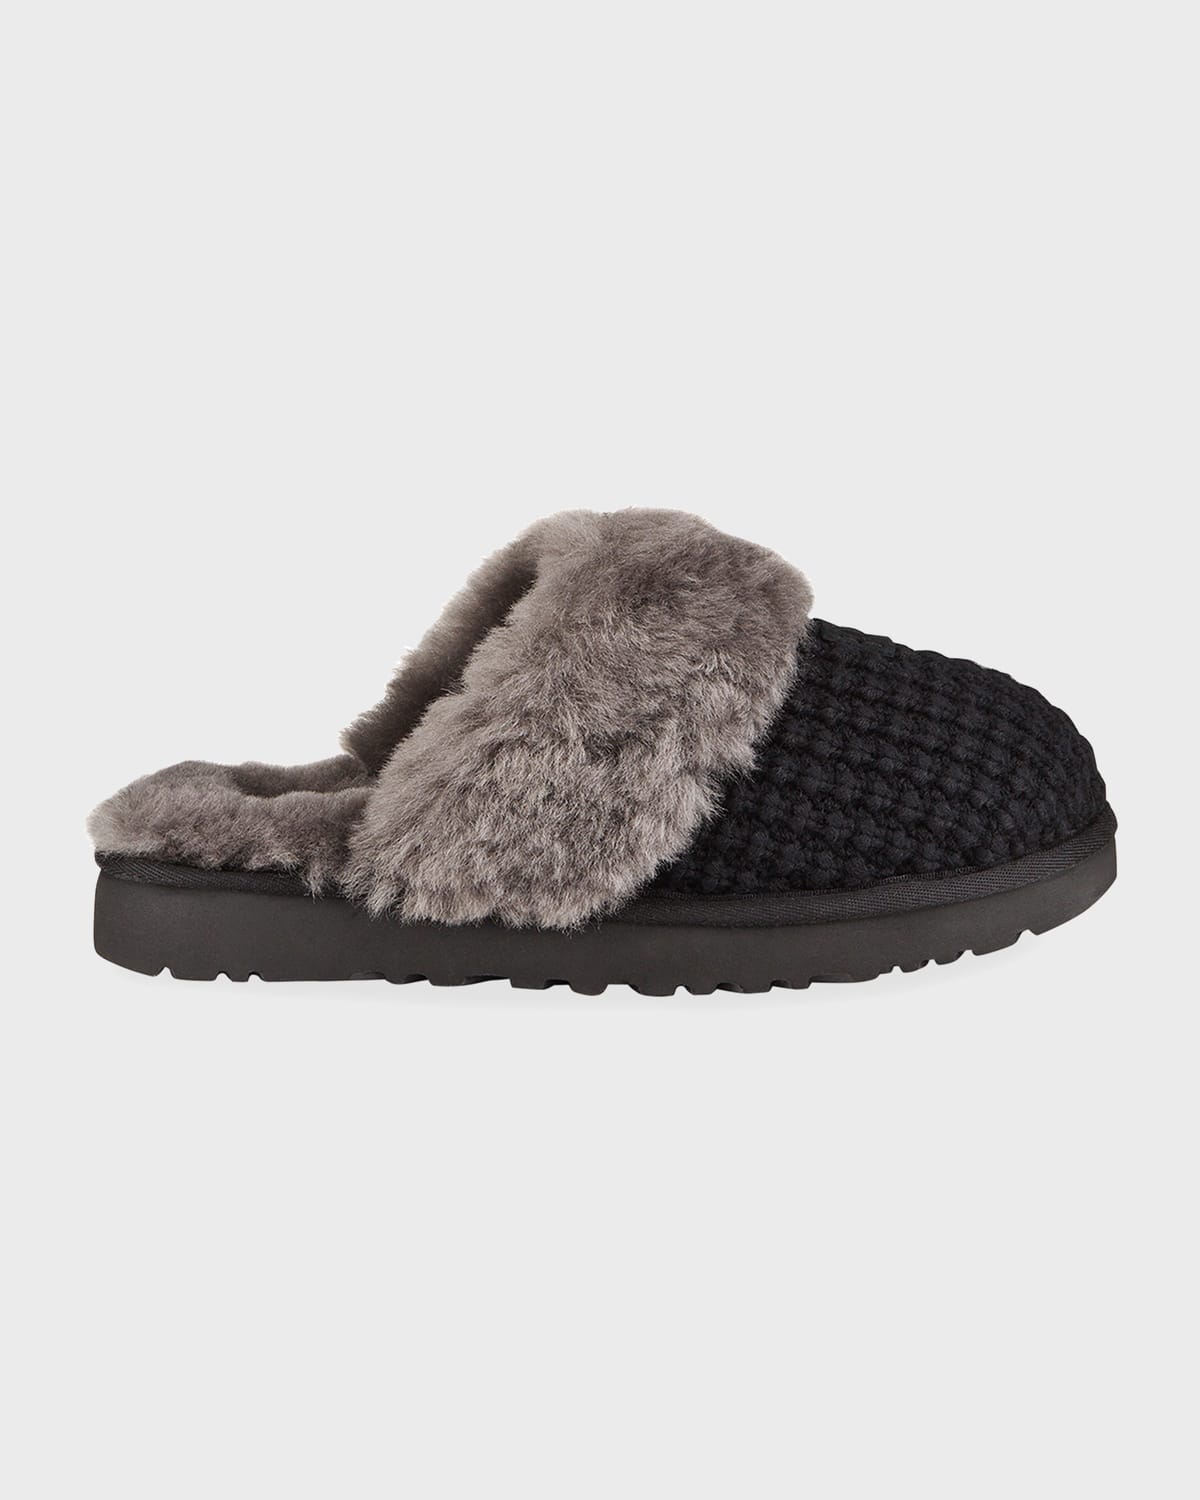 Shearling Lined Shoes | Neiman Marcus